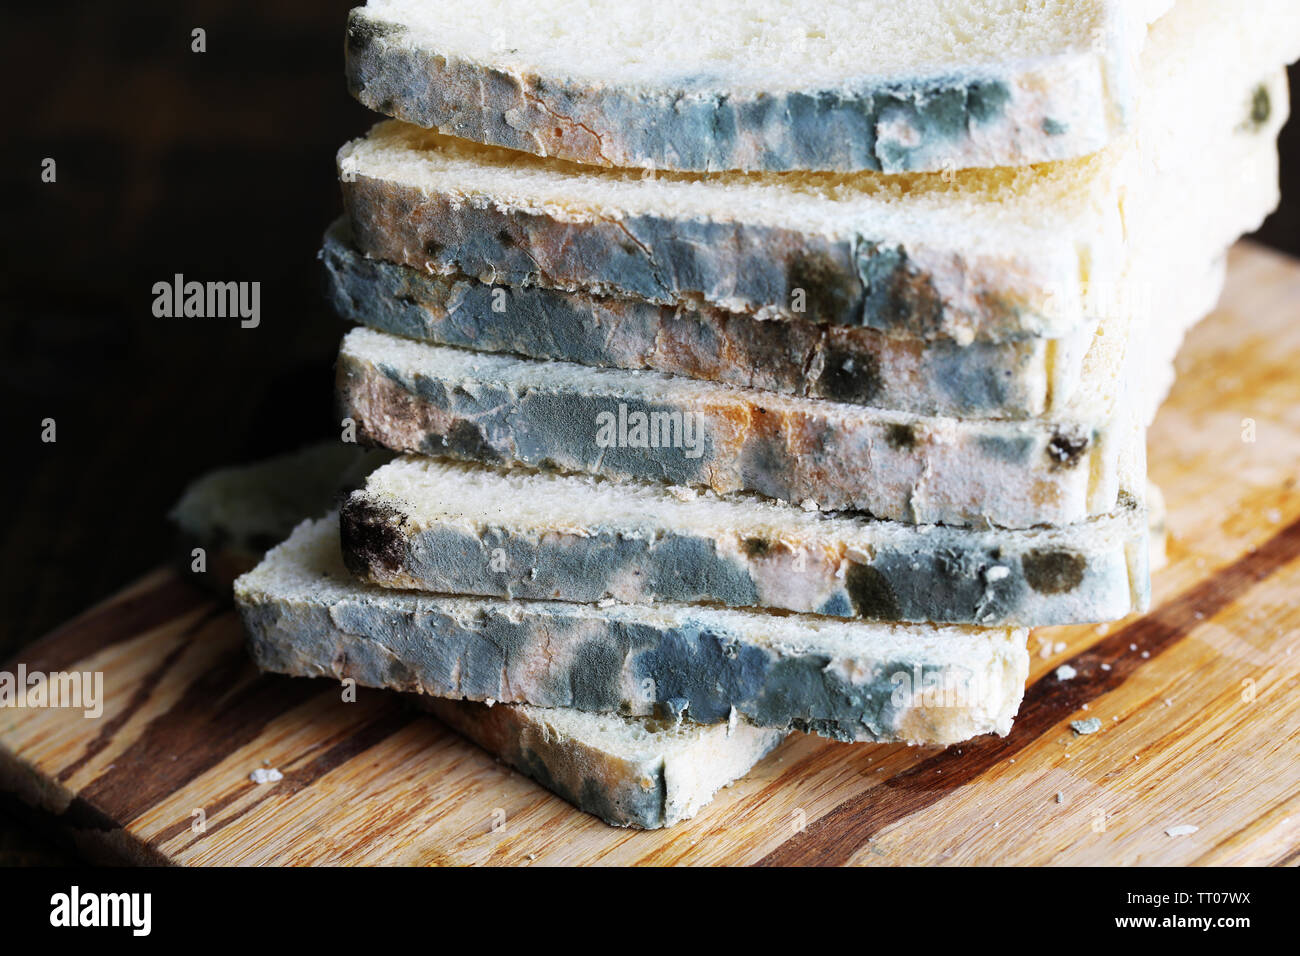 Mouldy bread on cutting board, on wooden background Stock Photo